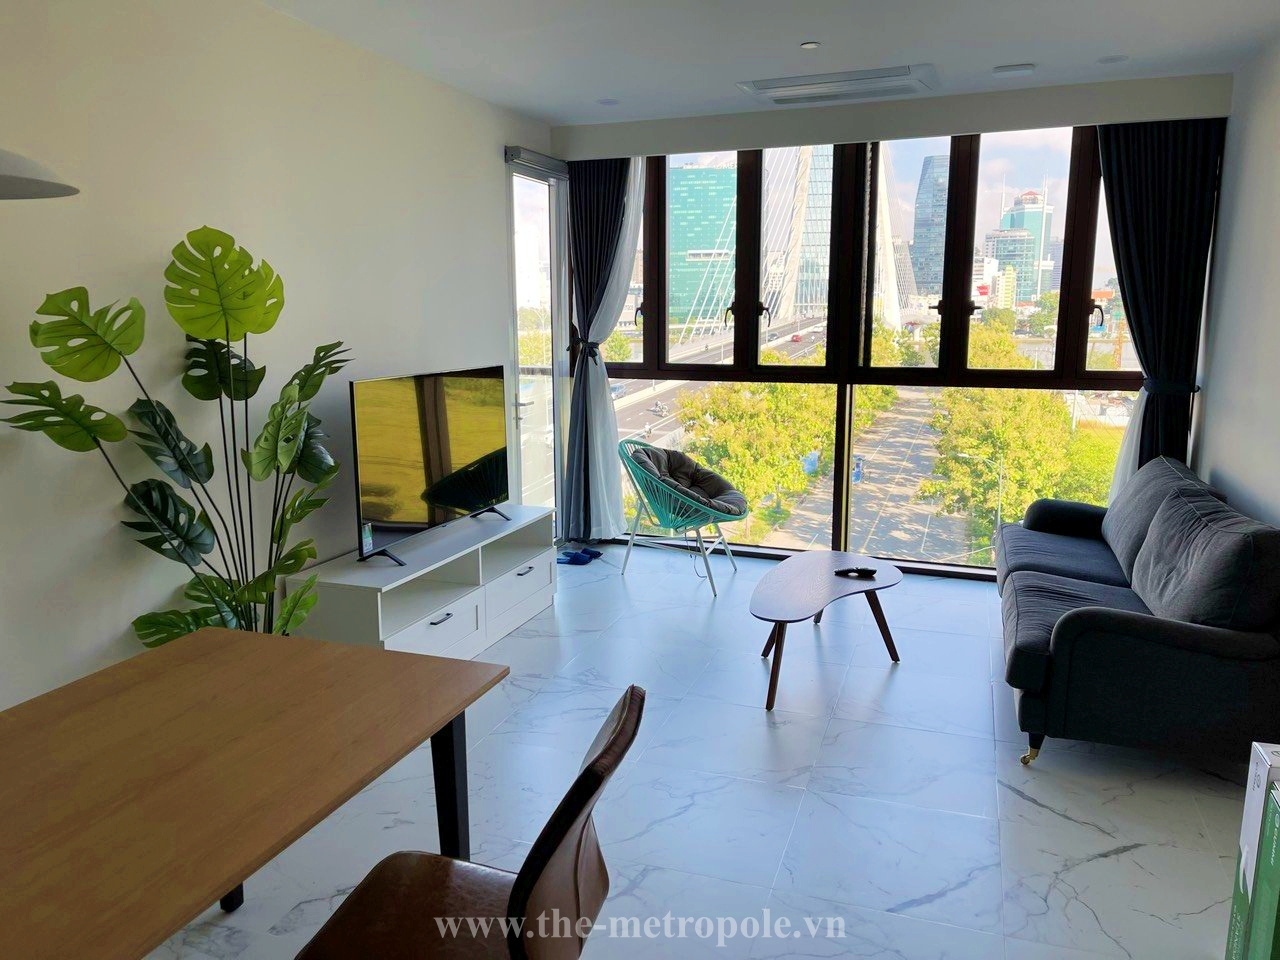 3 bedroom apartment for rent in The Galleria - The Metropole with river view